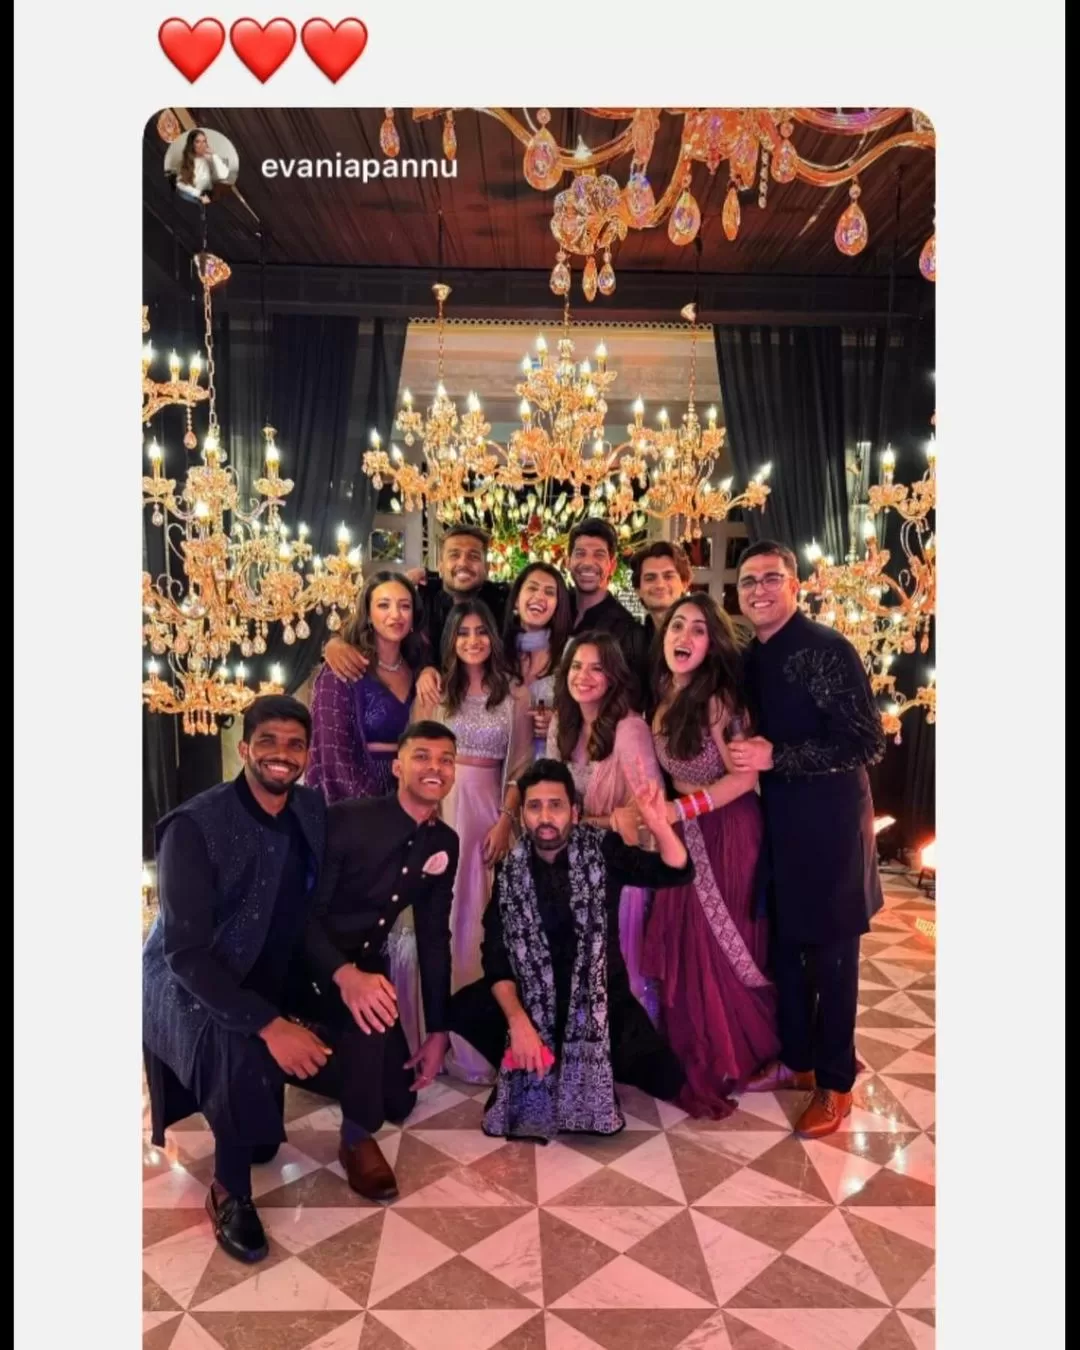 Inside Taapsee Pannu's Private Wedding: Pavail Gulati's Candid Snaps and Kanika Dhillon's Saree Clues Spark Excitement